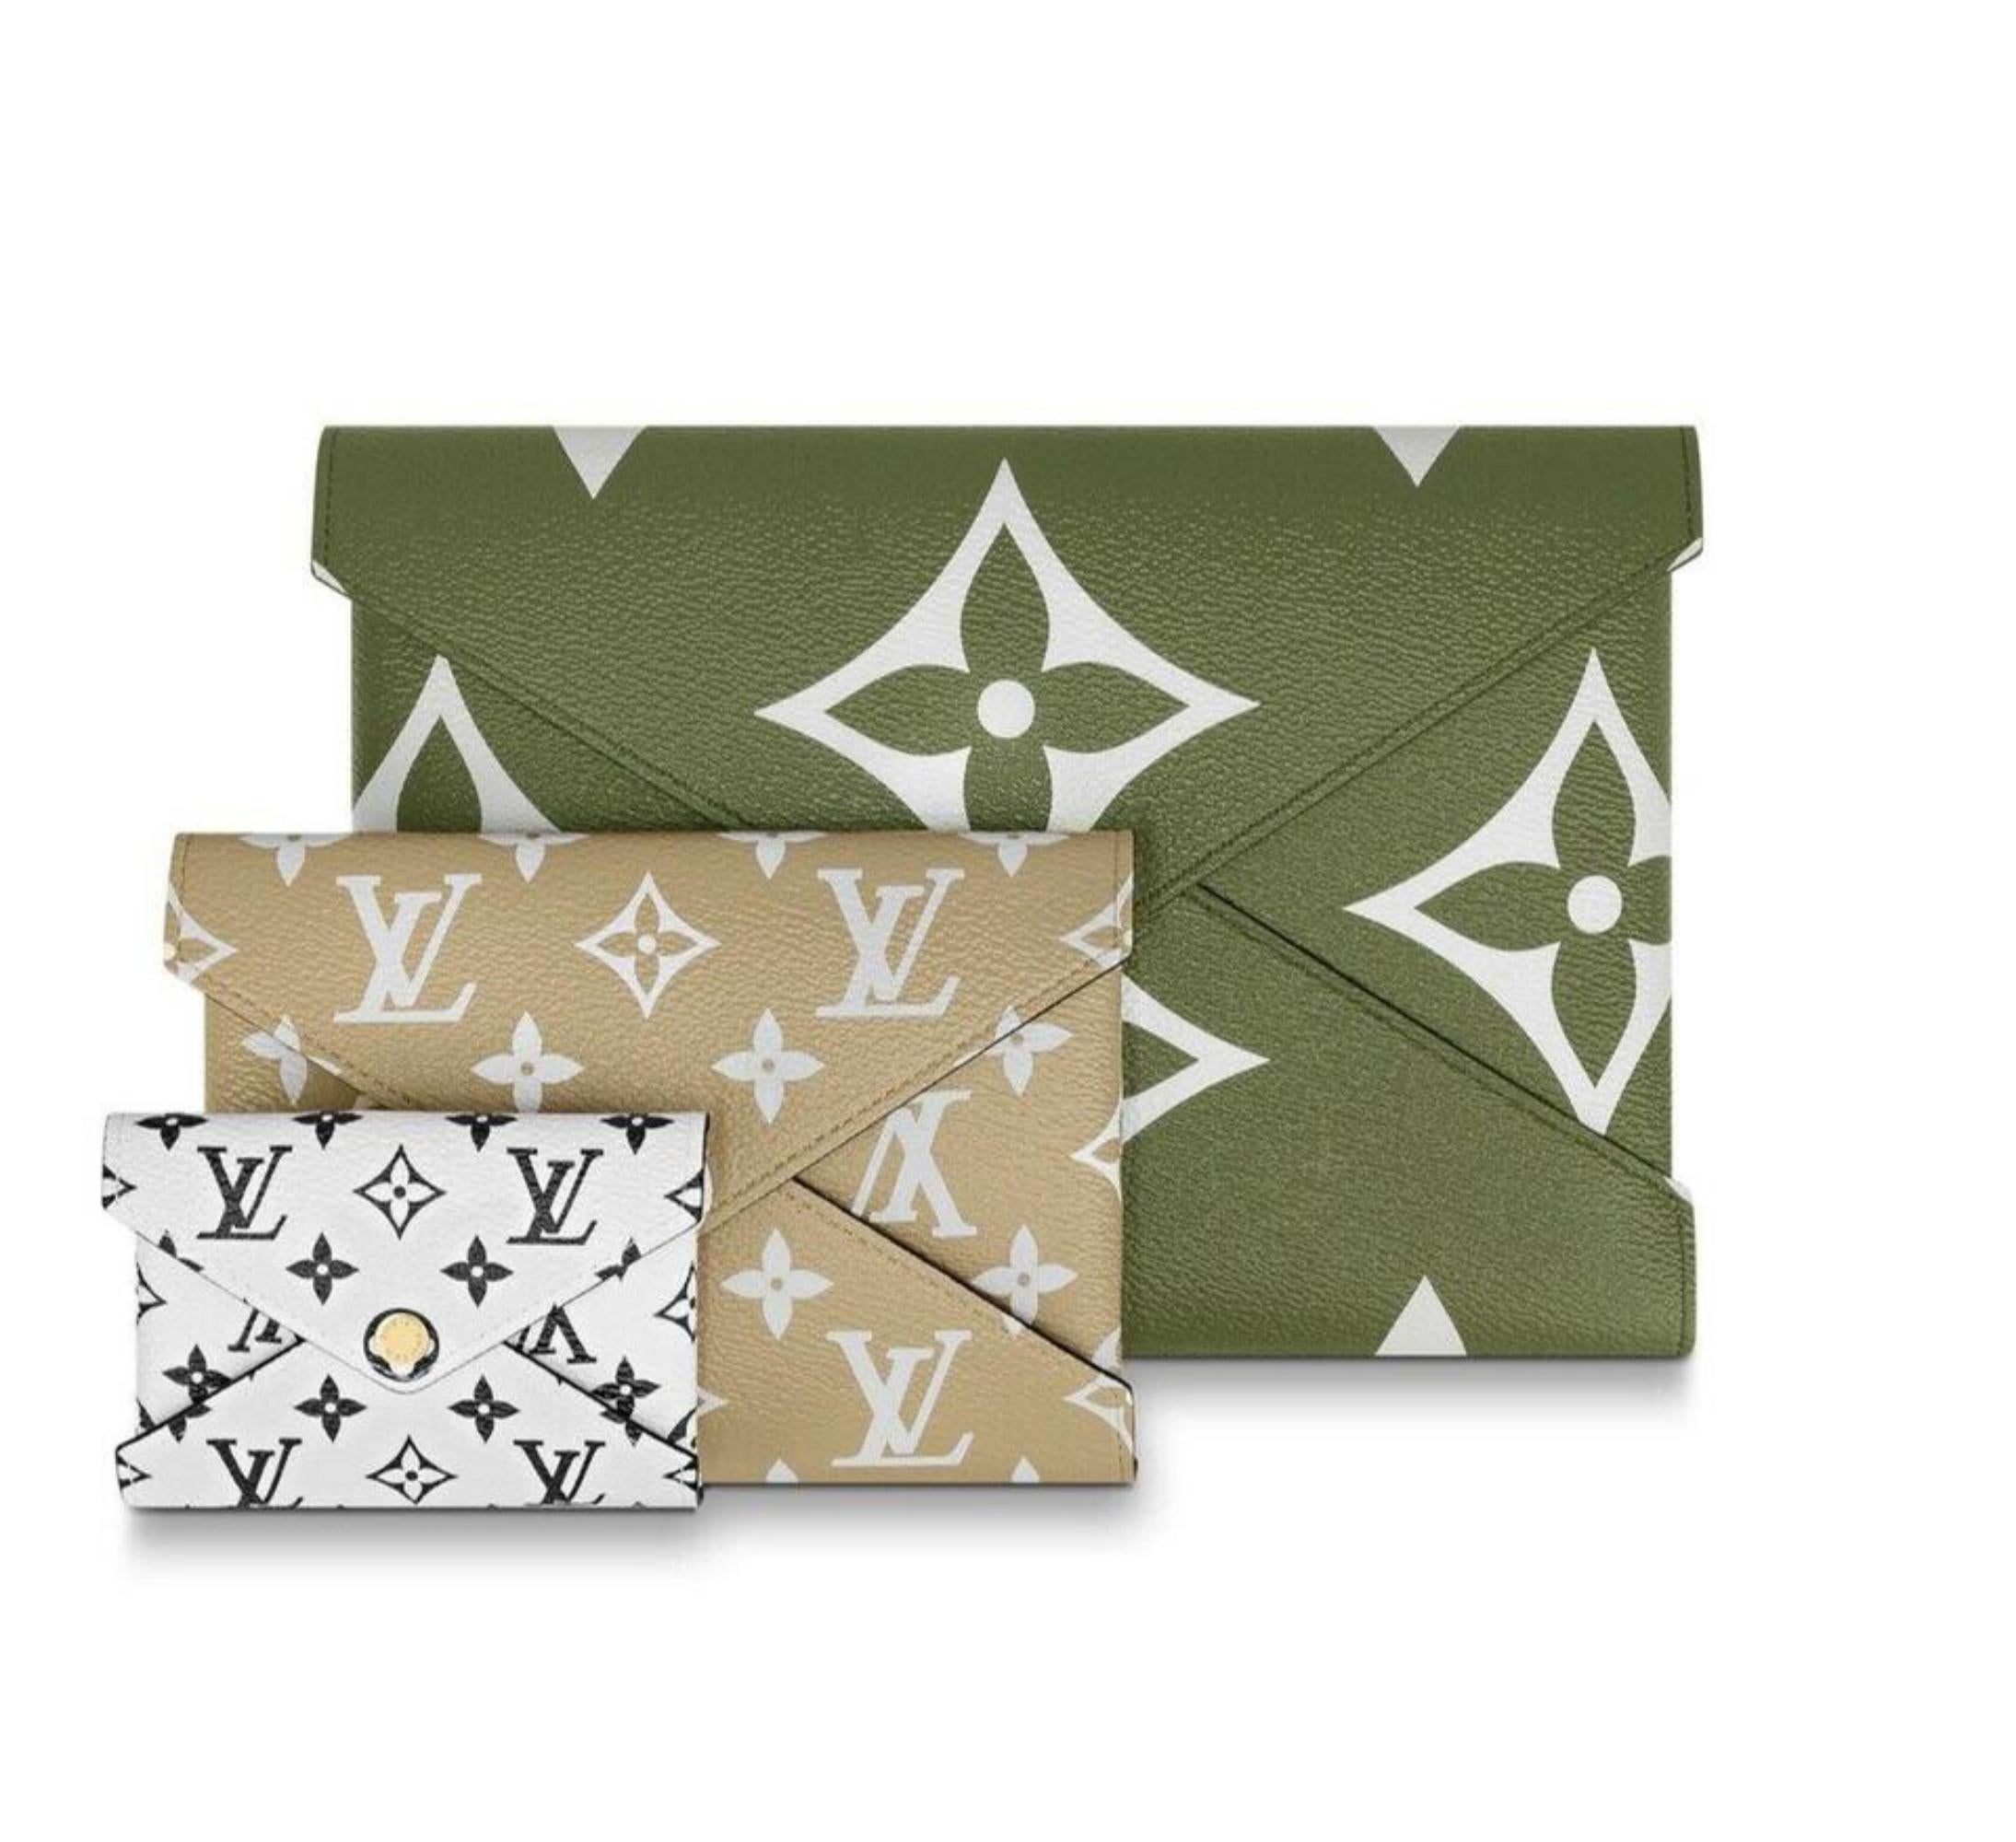 Louis Vuitton Pochette KirigamiSet Of Three Envelope 870429 Green Canvas Clutch In New Condition For Sale In Forest Hills, NY